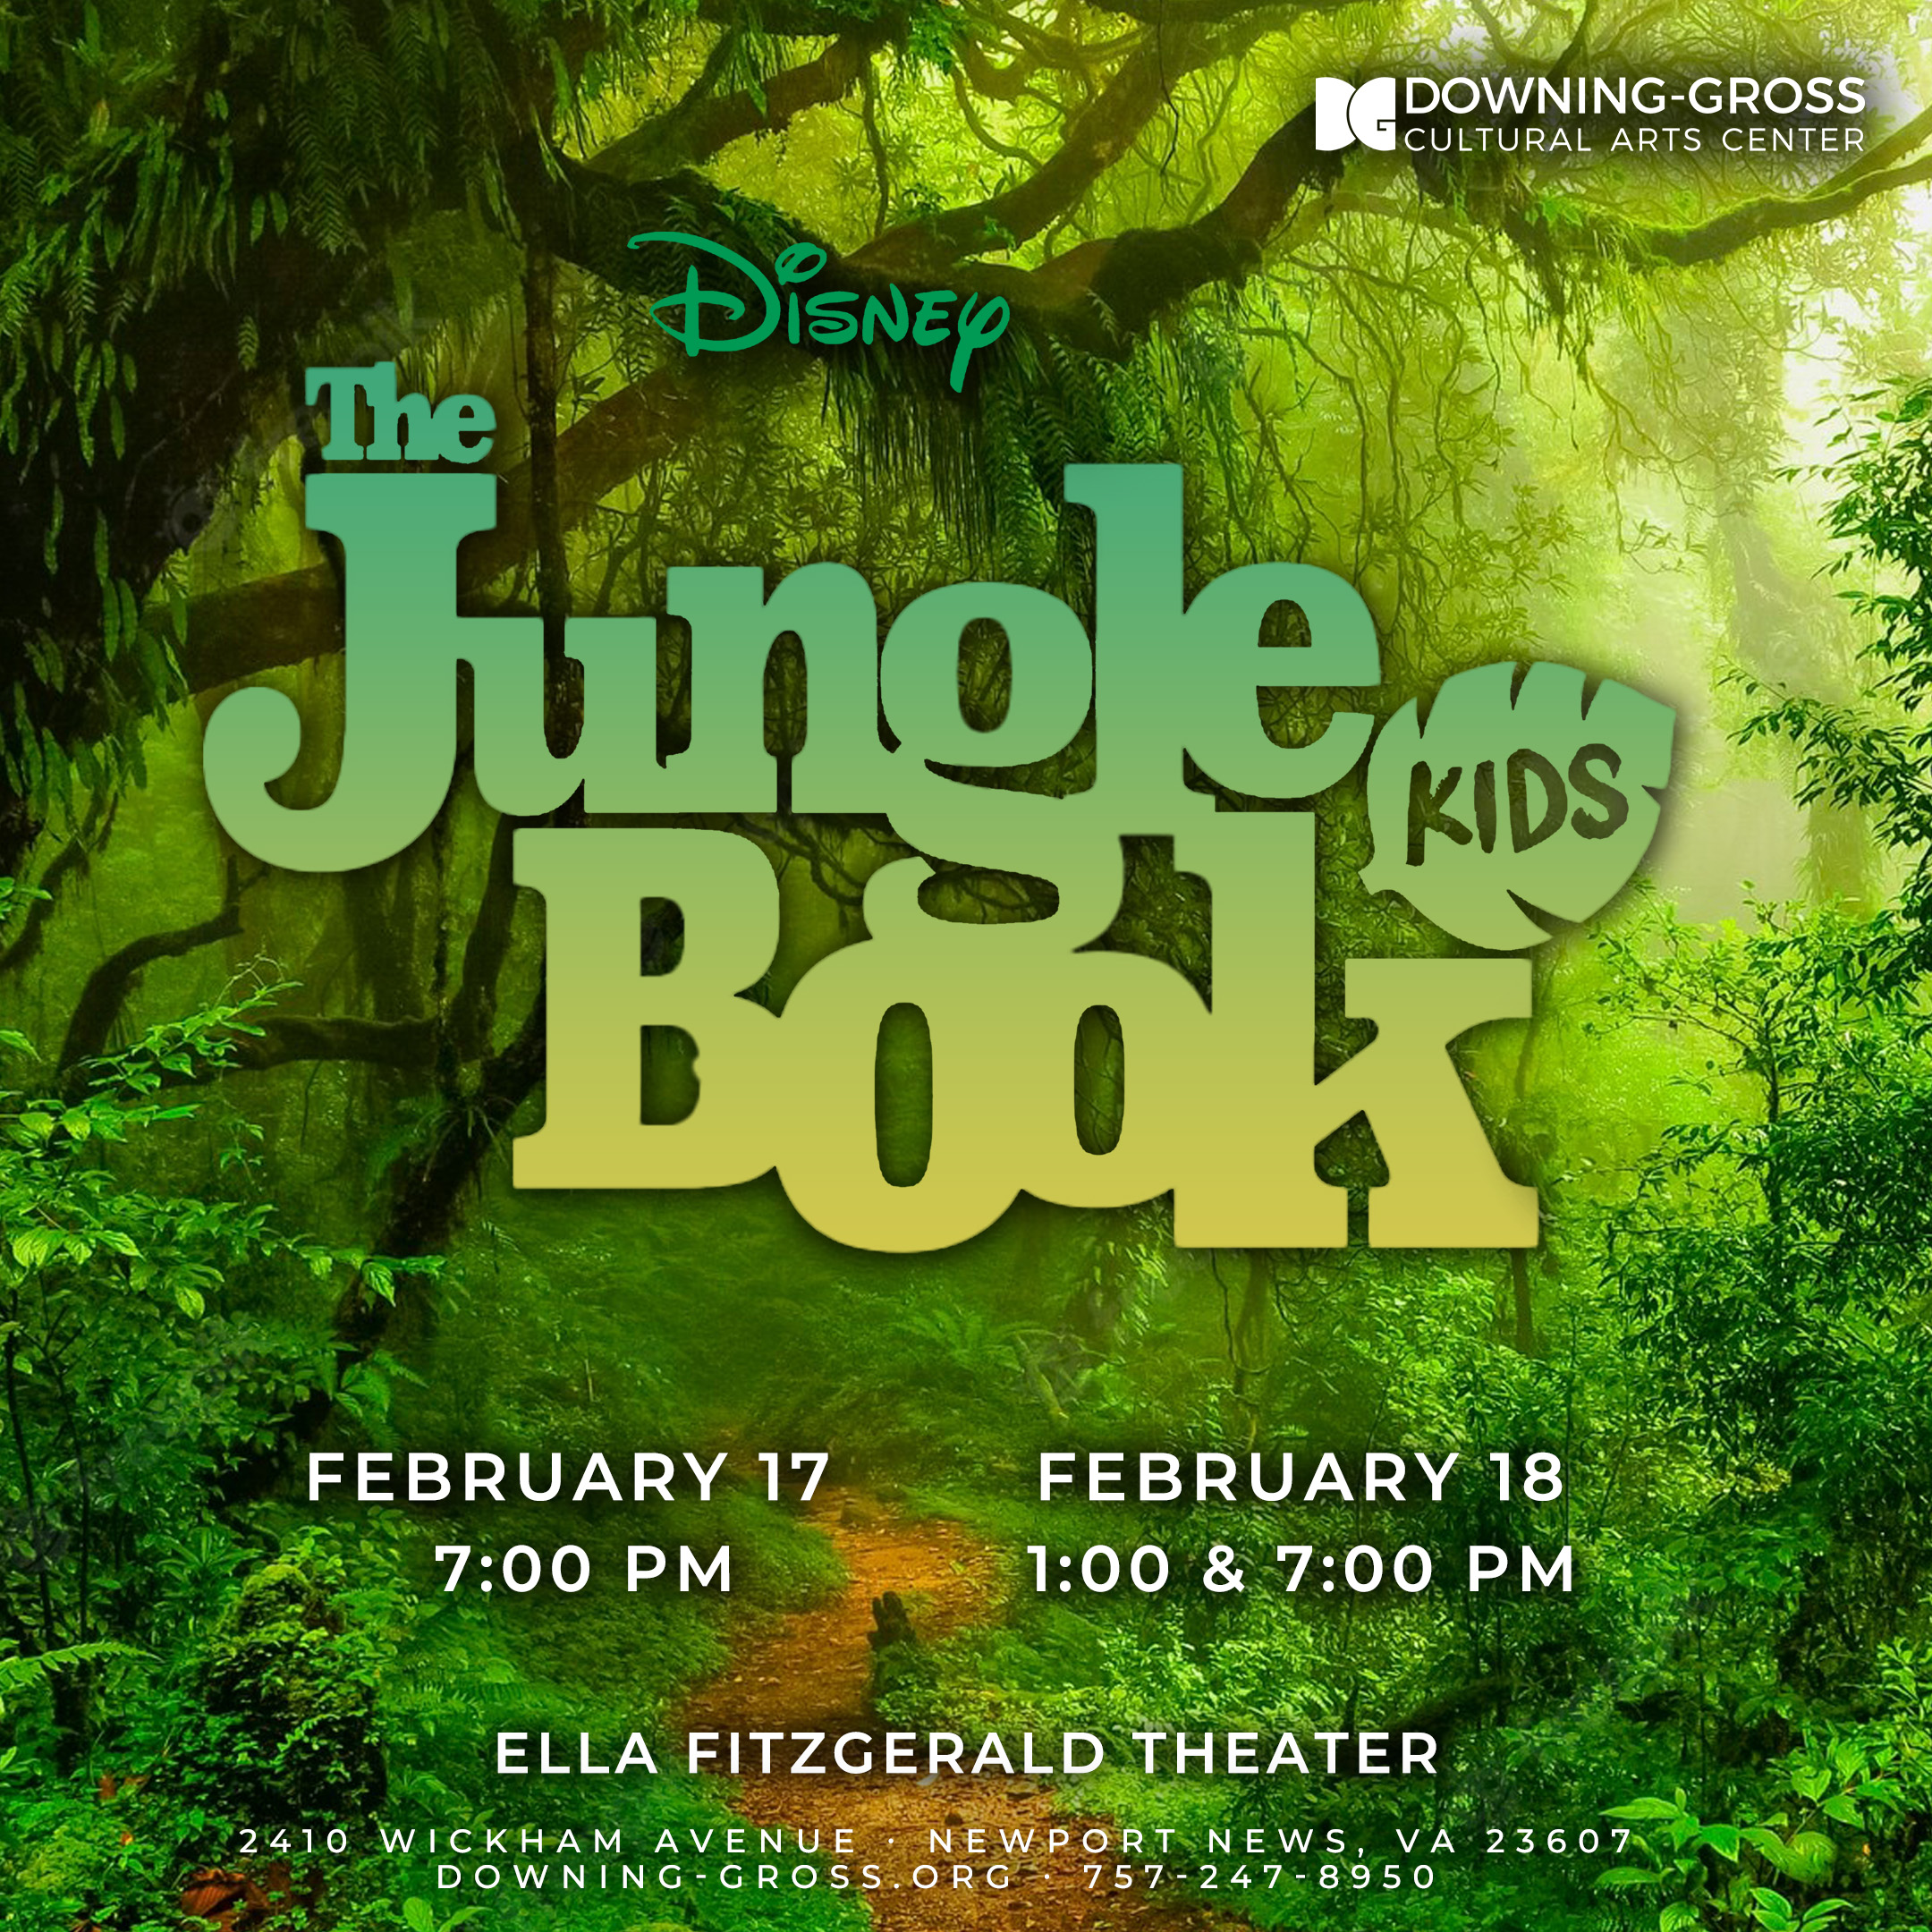 THE JUNGLE BOOK KIDS ‘SWINGS’ INTO DOWNING-GROSS CULTURAL ARTS CENTER ...